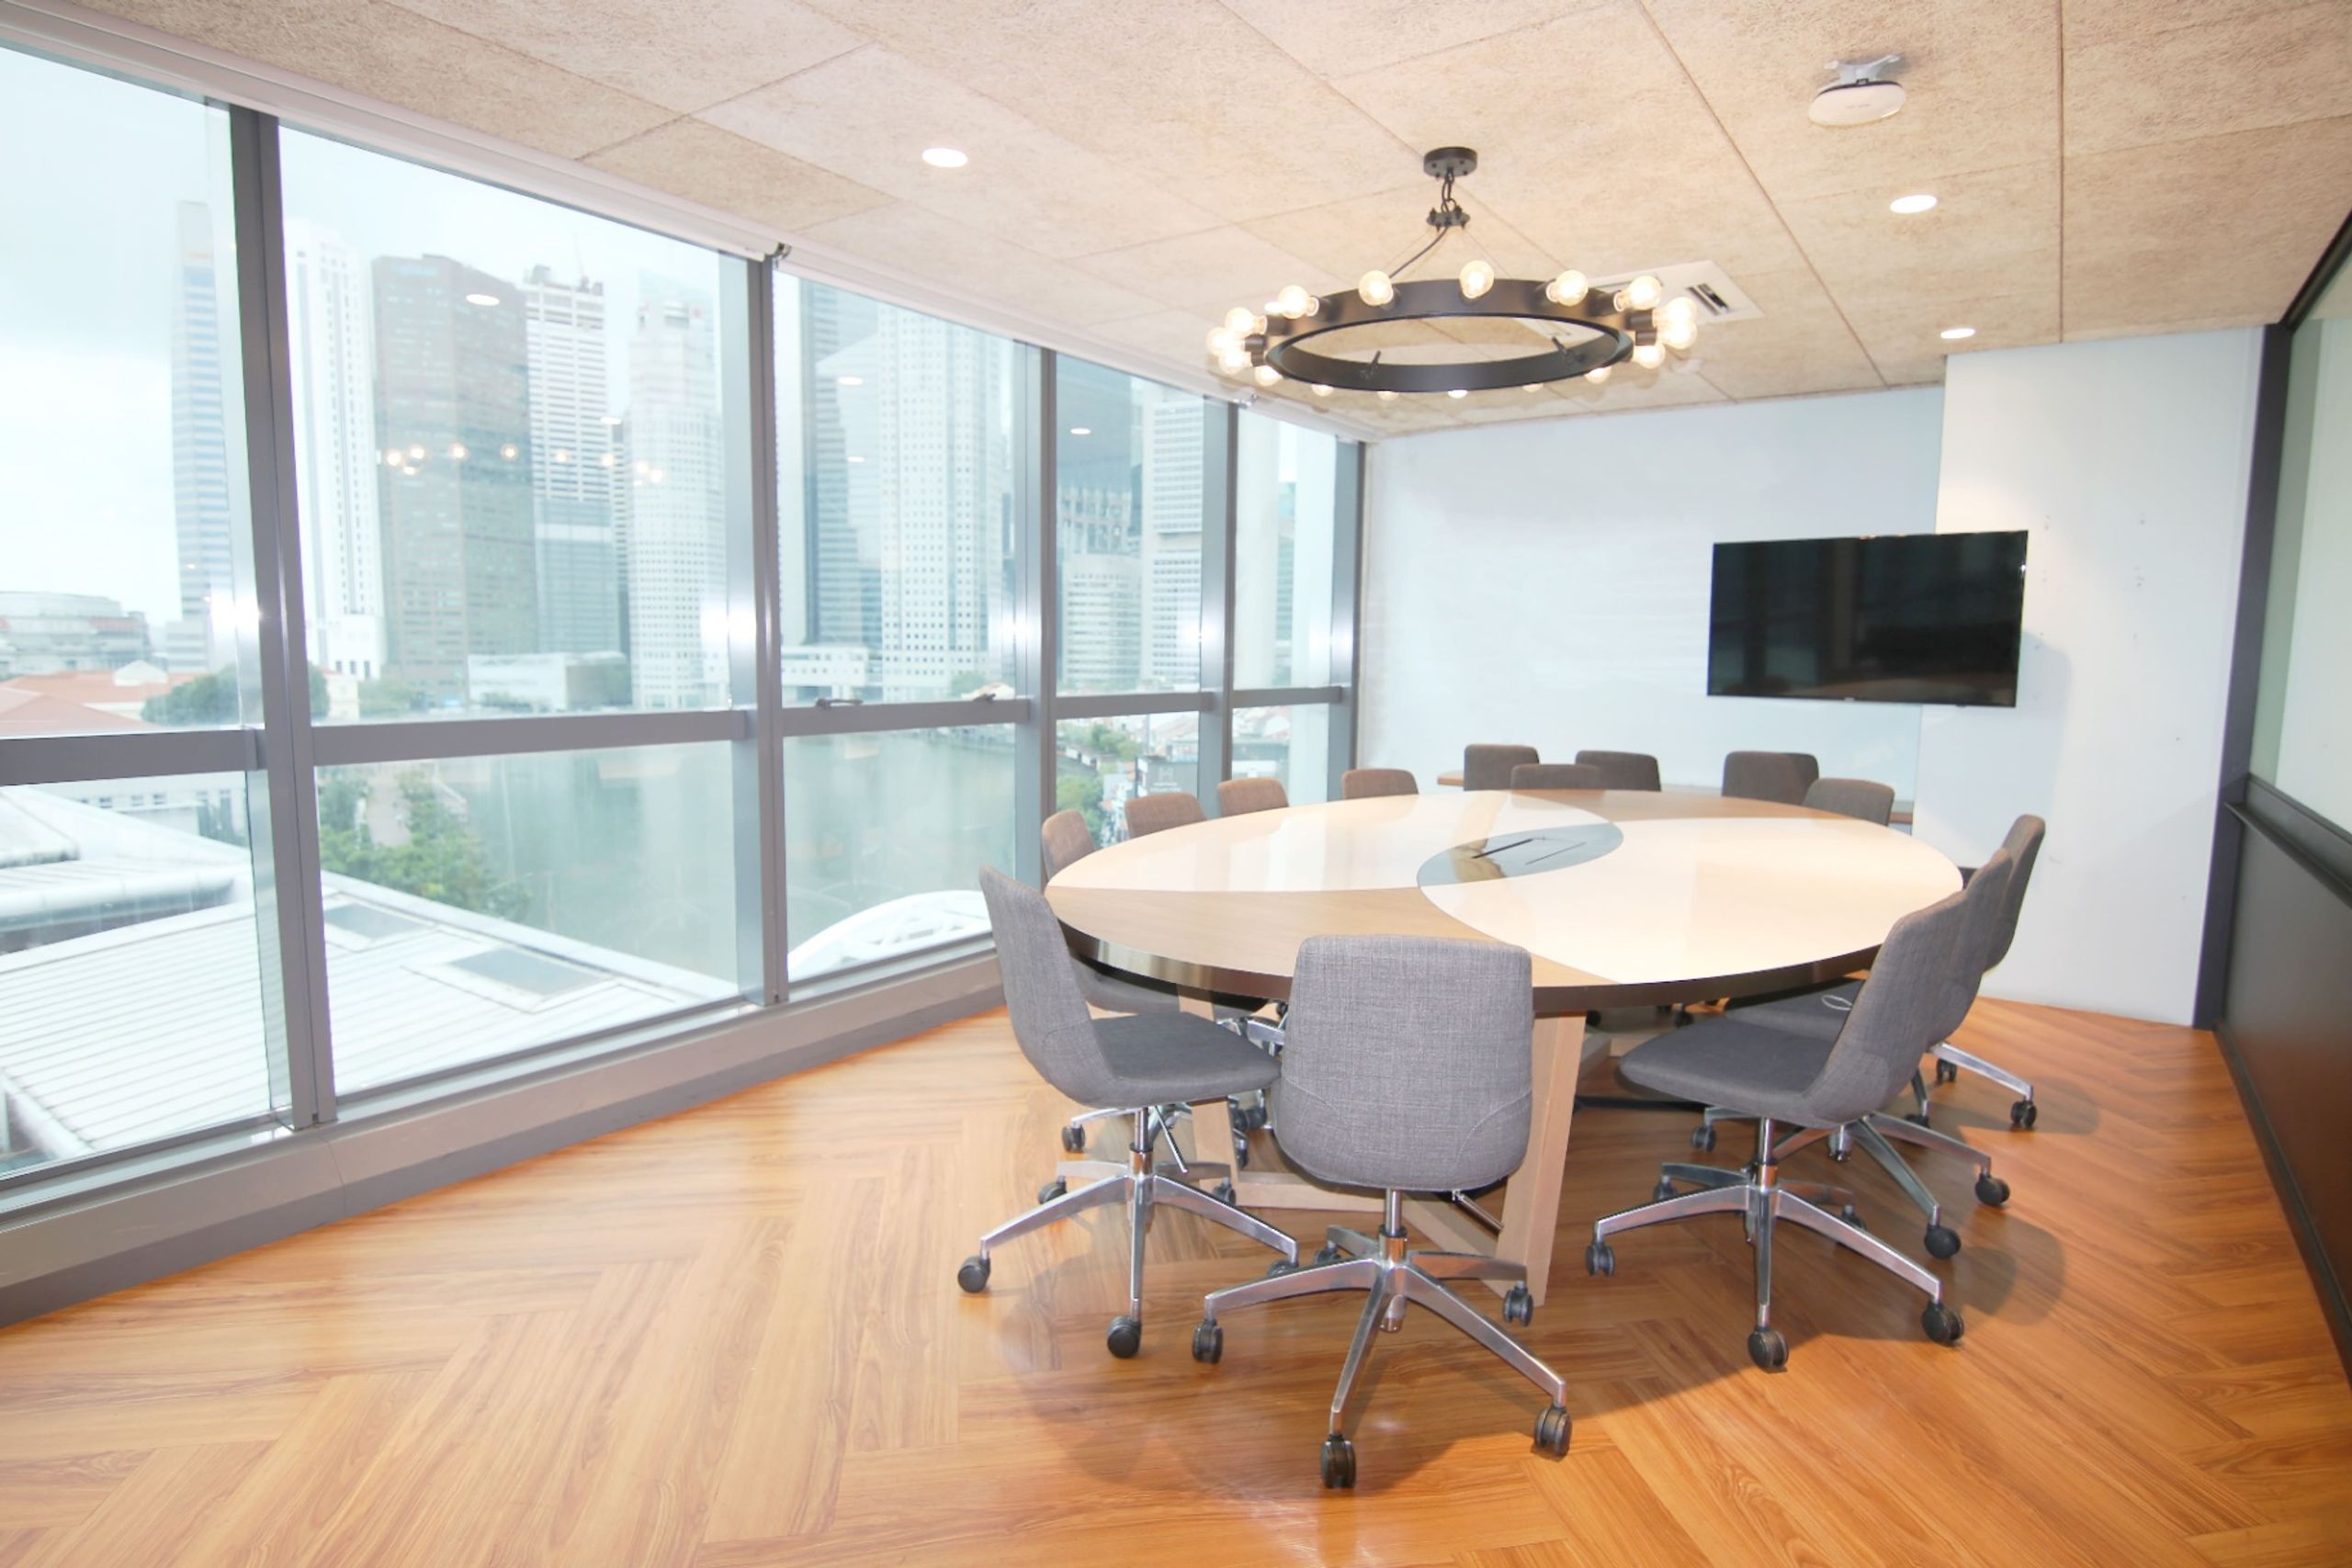 Meeting Room for 14 at The Hive - North Bridge Road